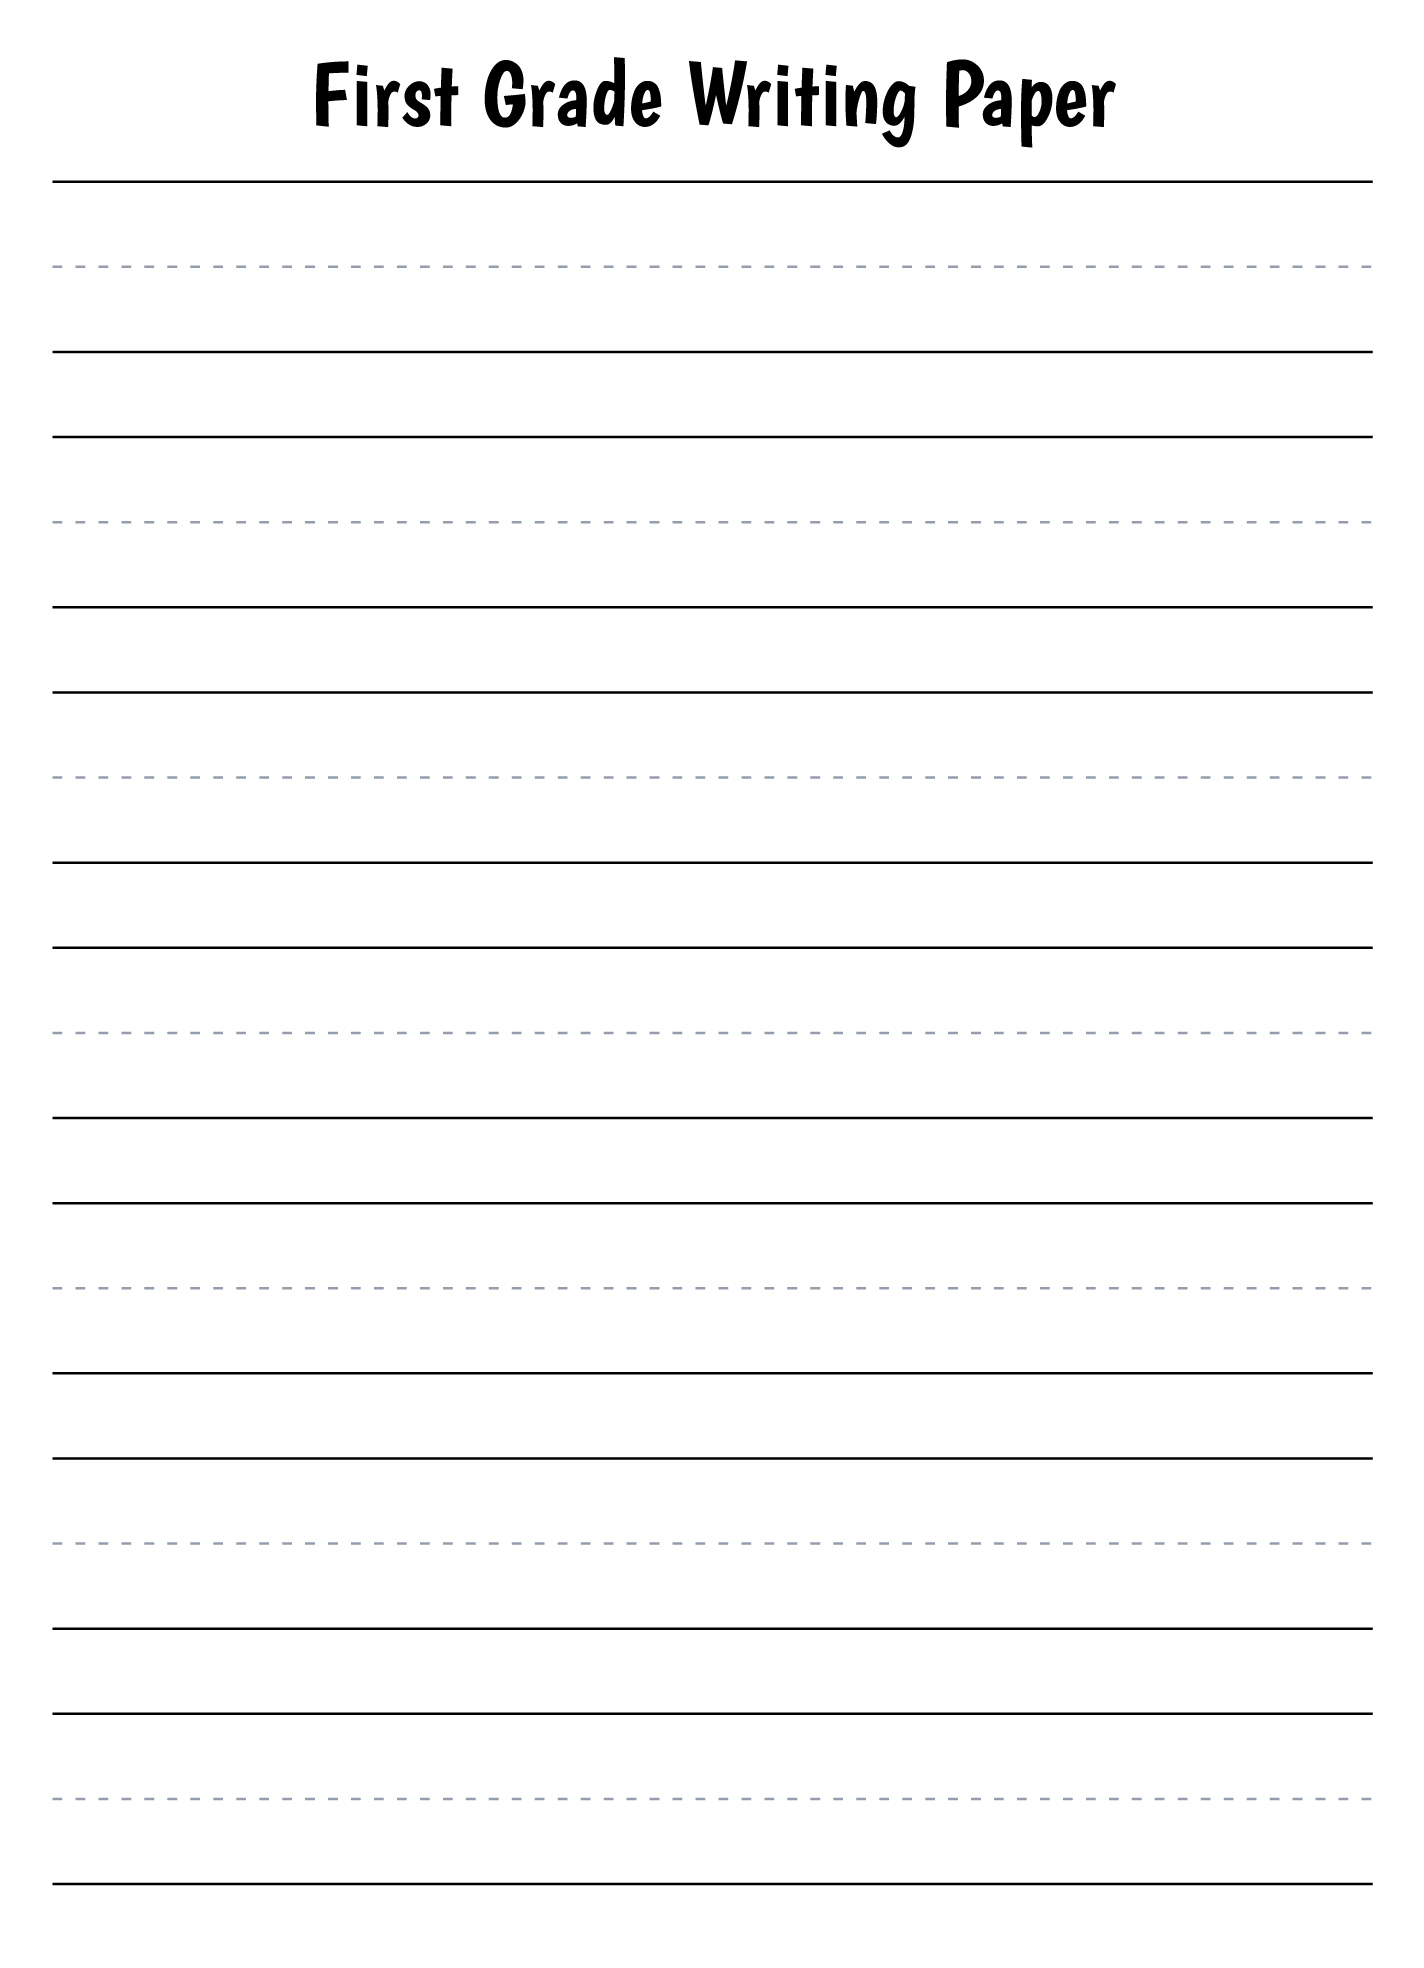 First Grade Lined Paper Free Google Docs Template - Gdoc.io in Free Printable Handwriting Paper For First Grade